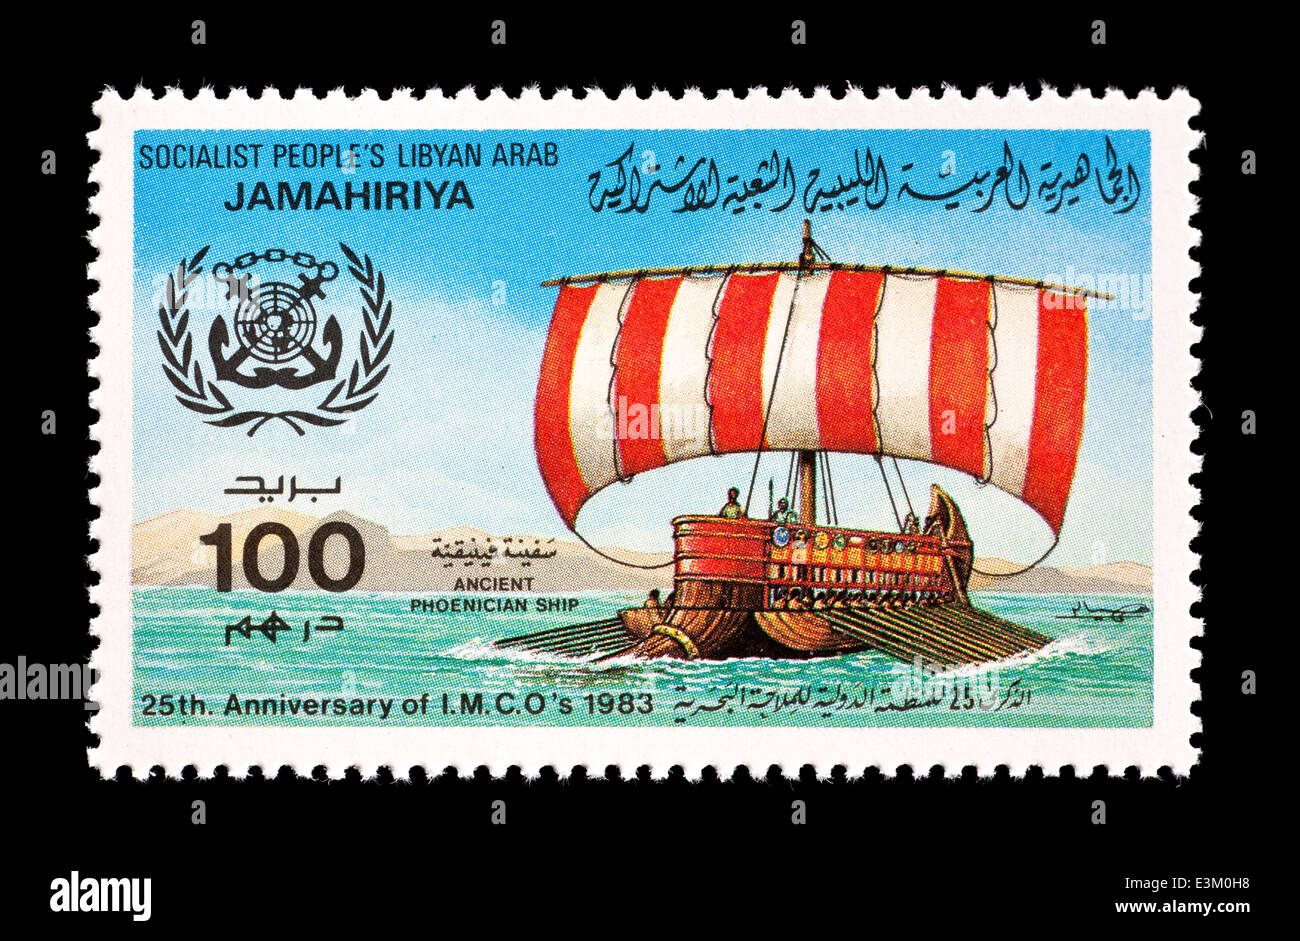 Postage stamp from Libya depicting an ancient Phoenician sailing ship. Stock Photo